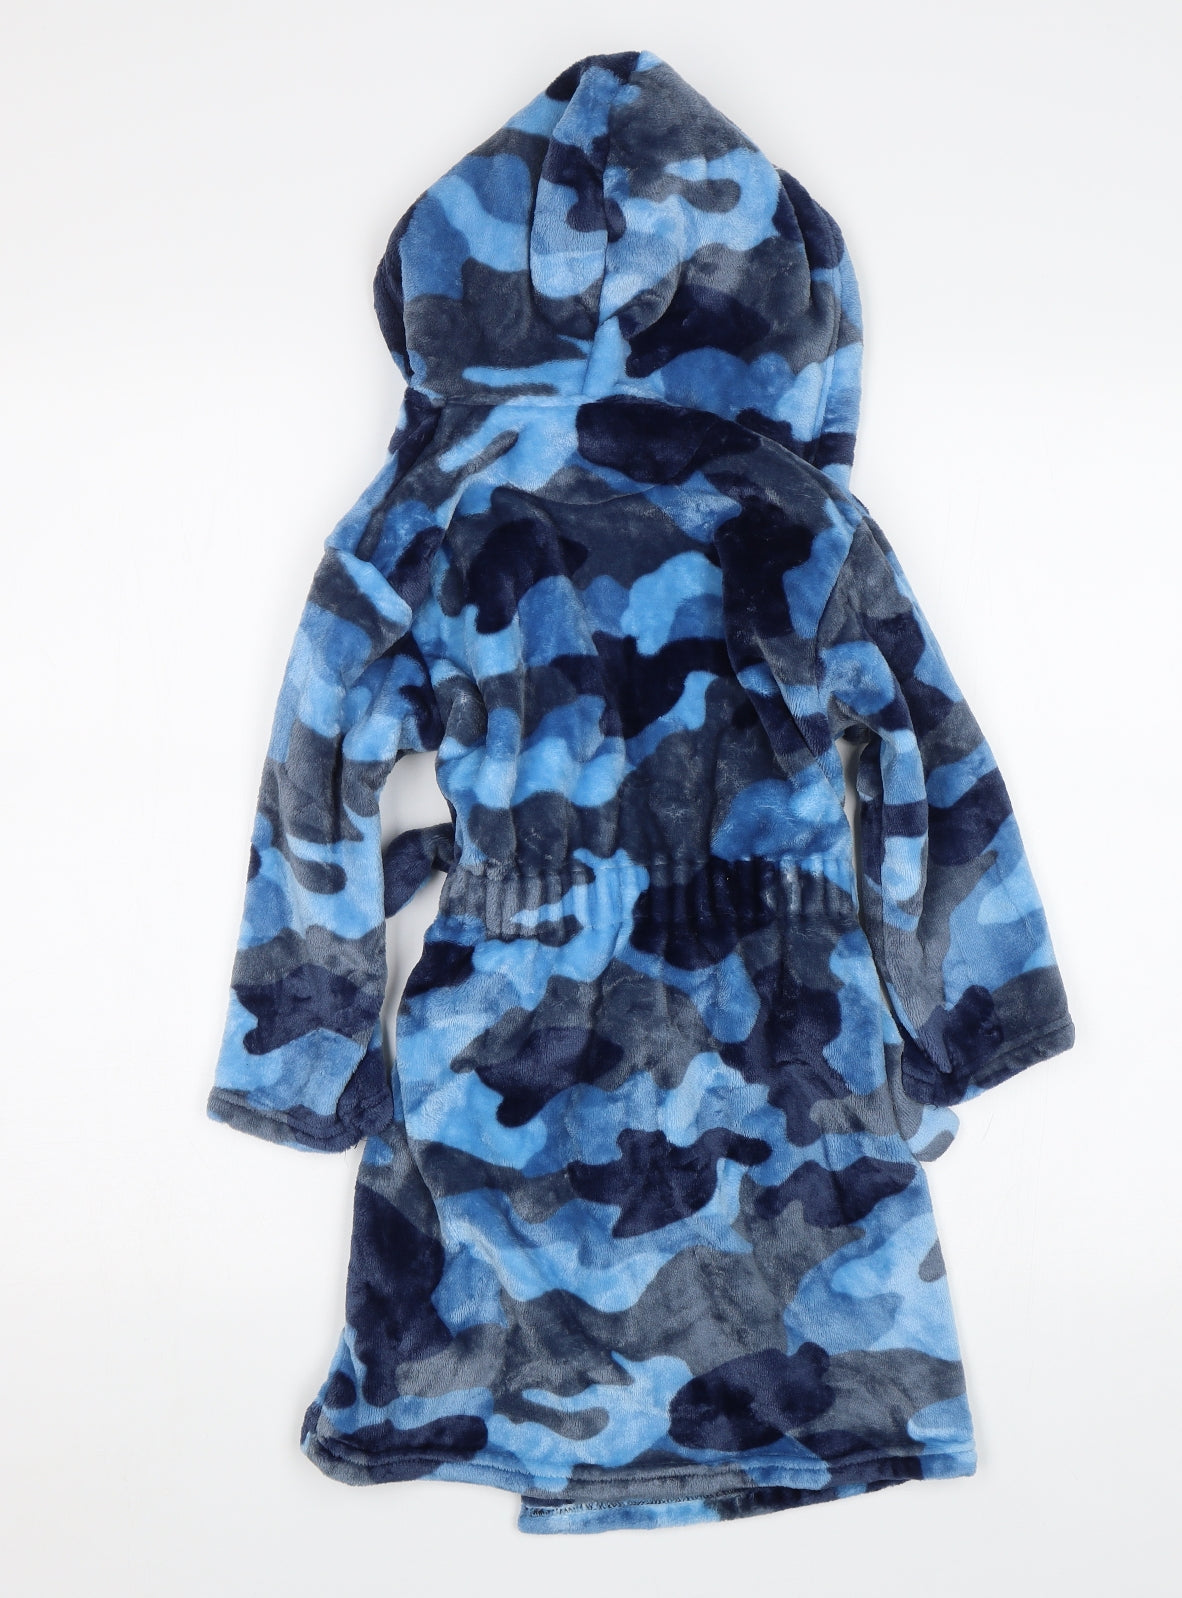 M&S Boys Blue Camouflage   Gown Size 5-6 Years